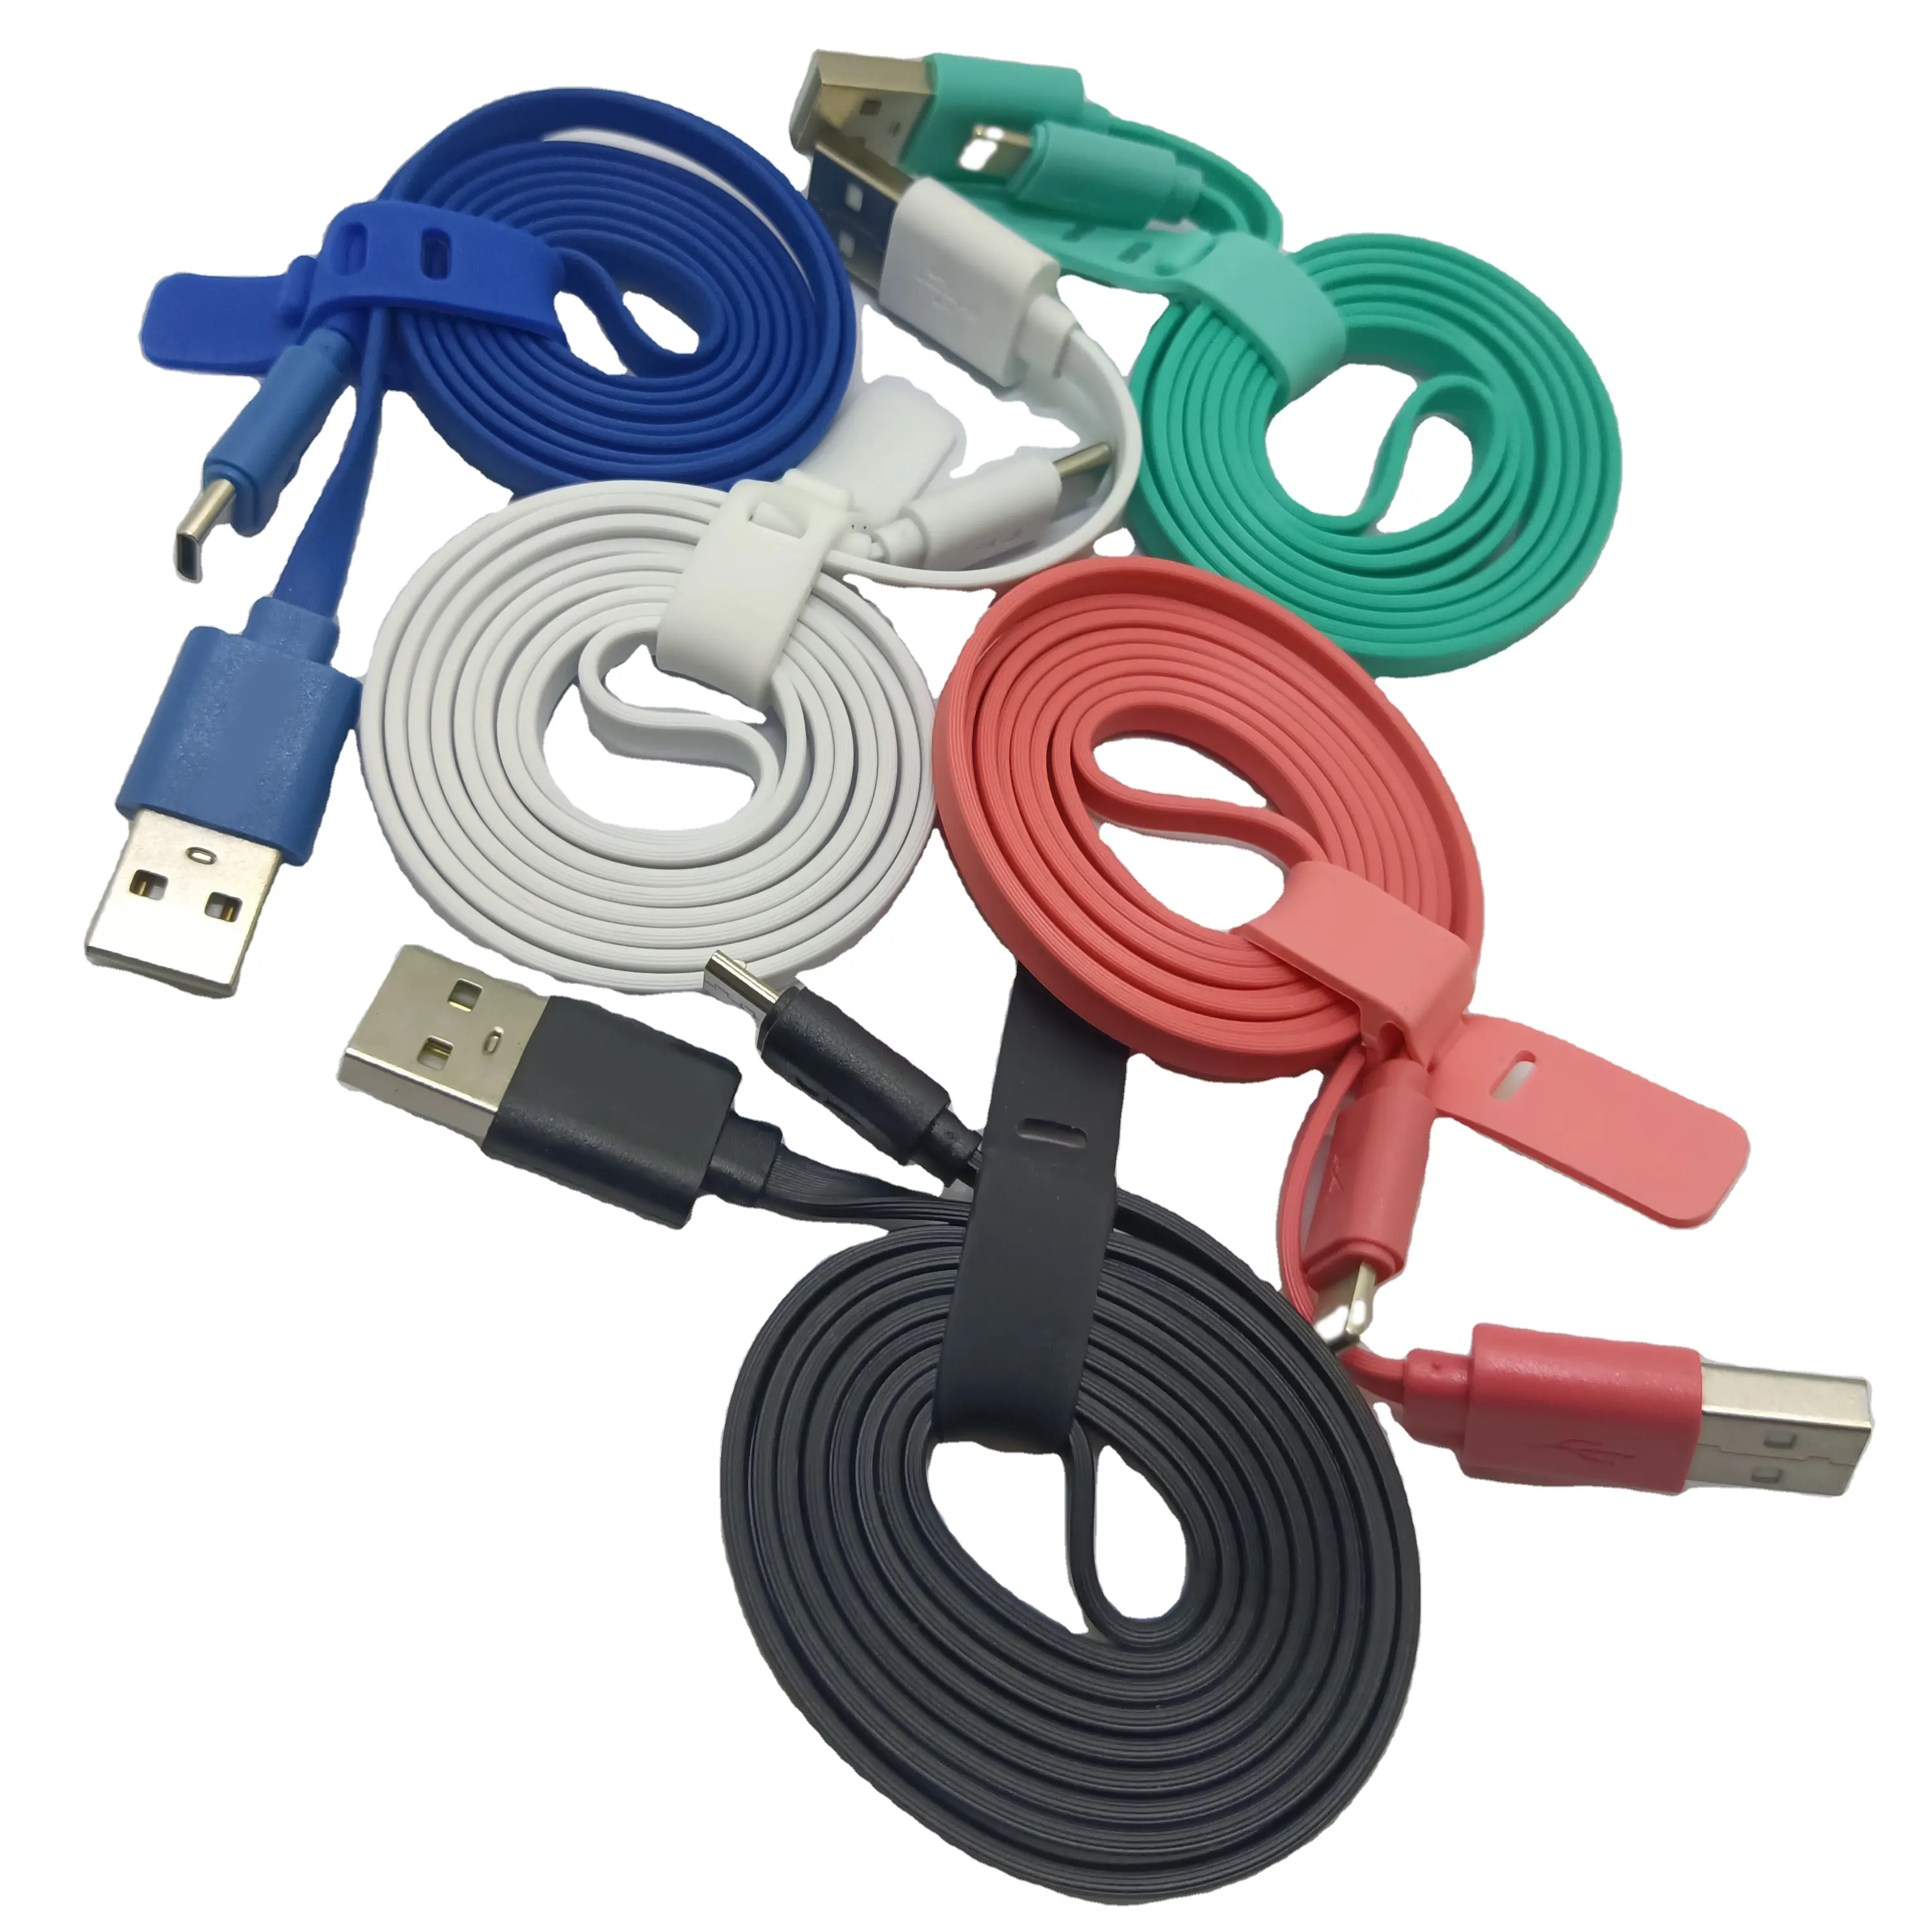 Hot Selling Customized Noodle Flat USB Data Transfer Charging Cable USB 2.0 Fast Mobile Phone